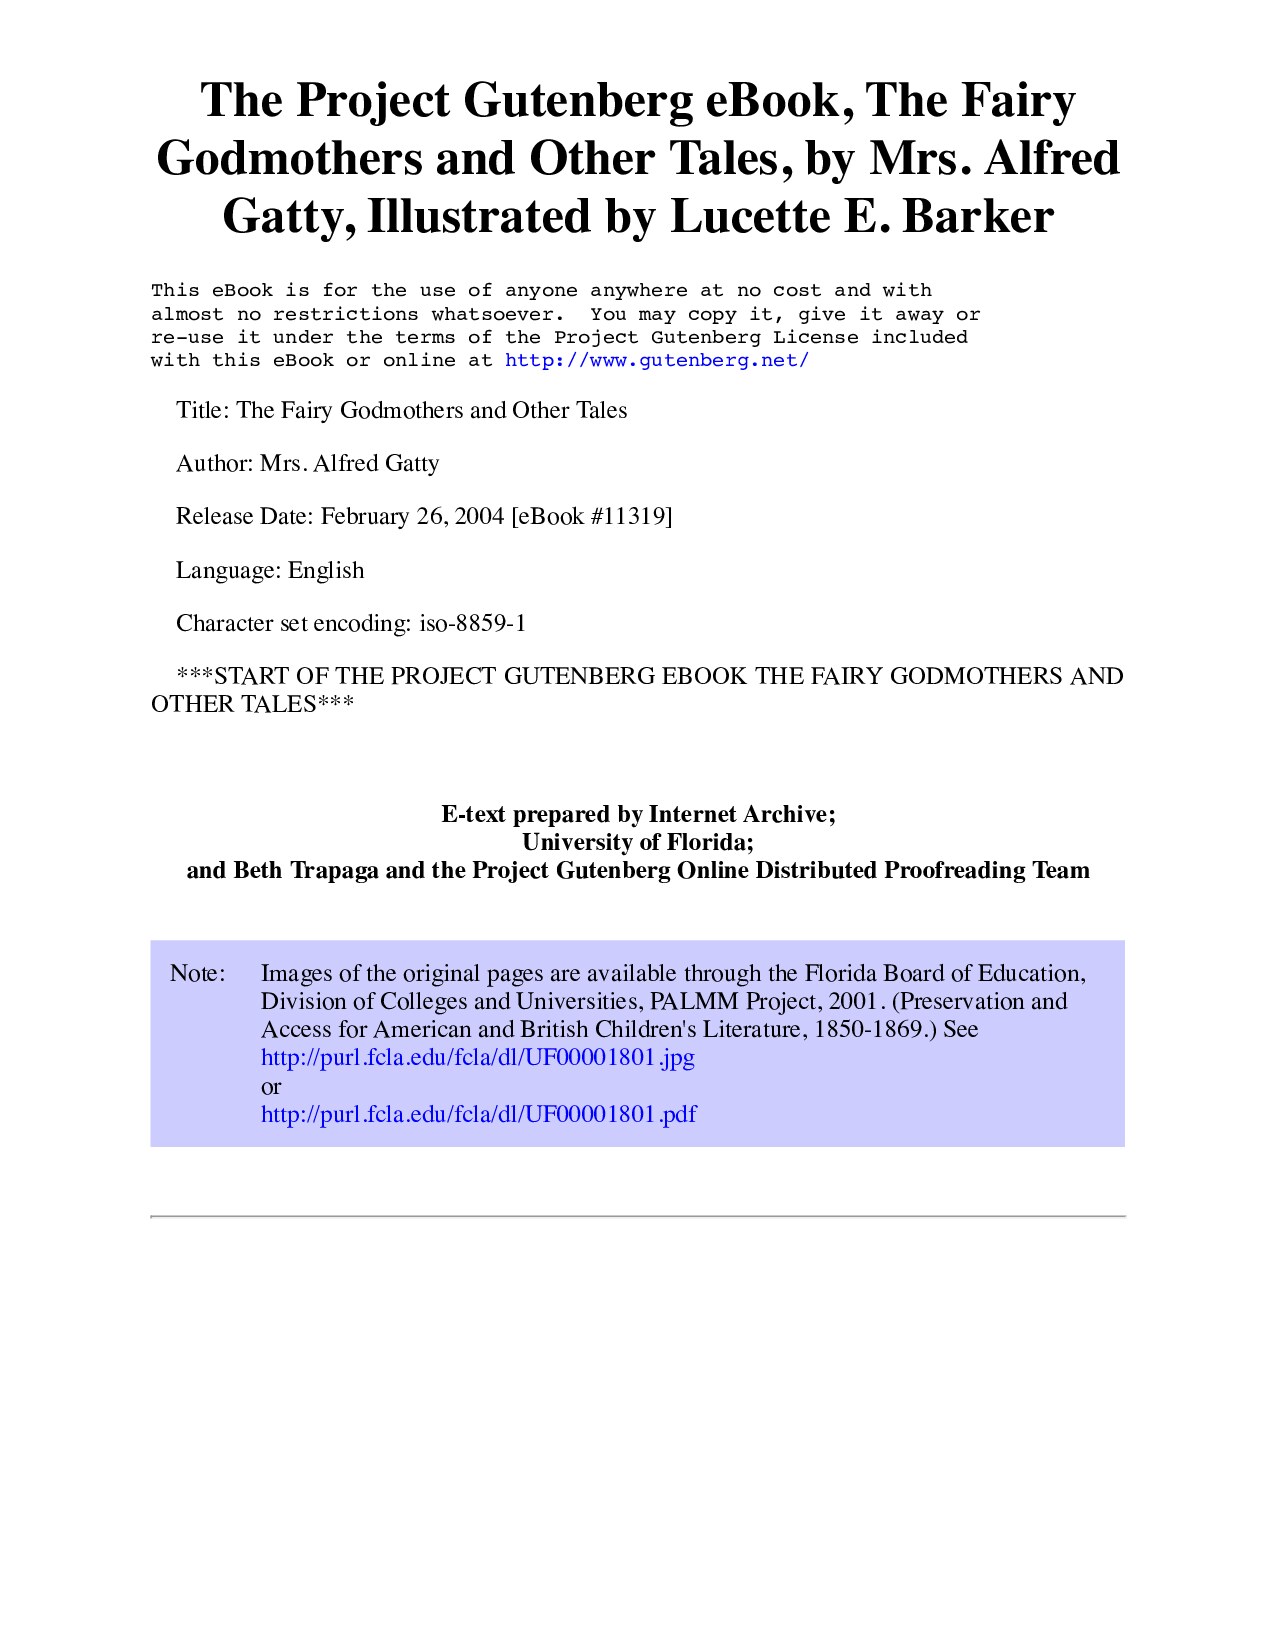 The Project Gutenberg eBook of The Fairy Godmothers and Other Tales, by Mrs_ Alfred Gatty